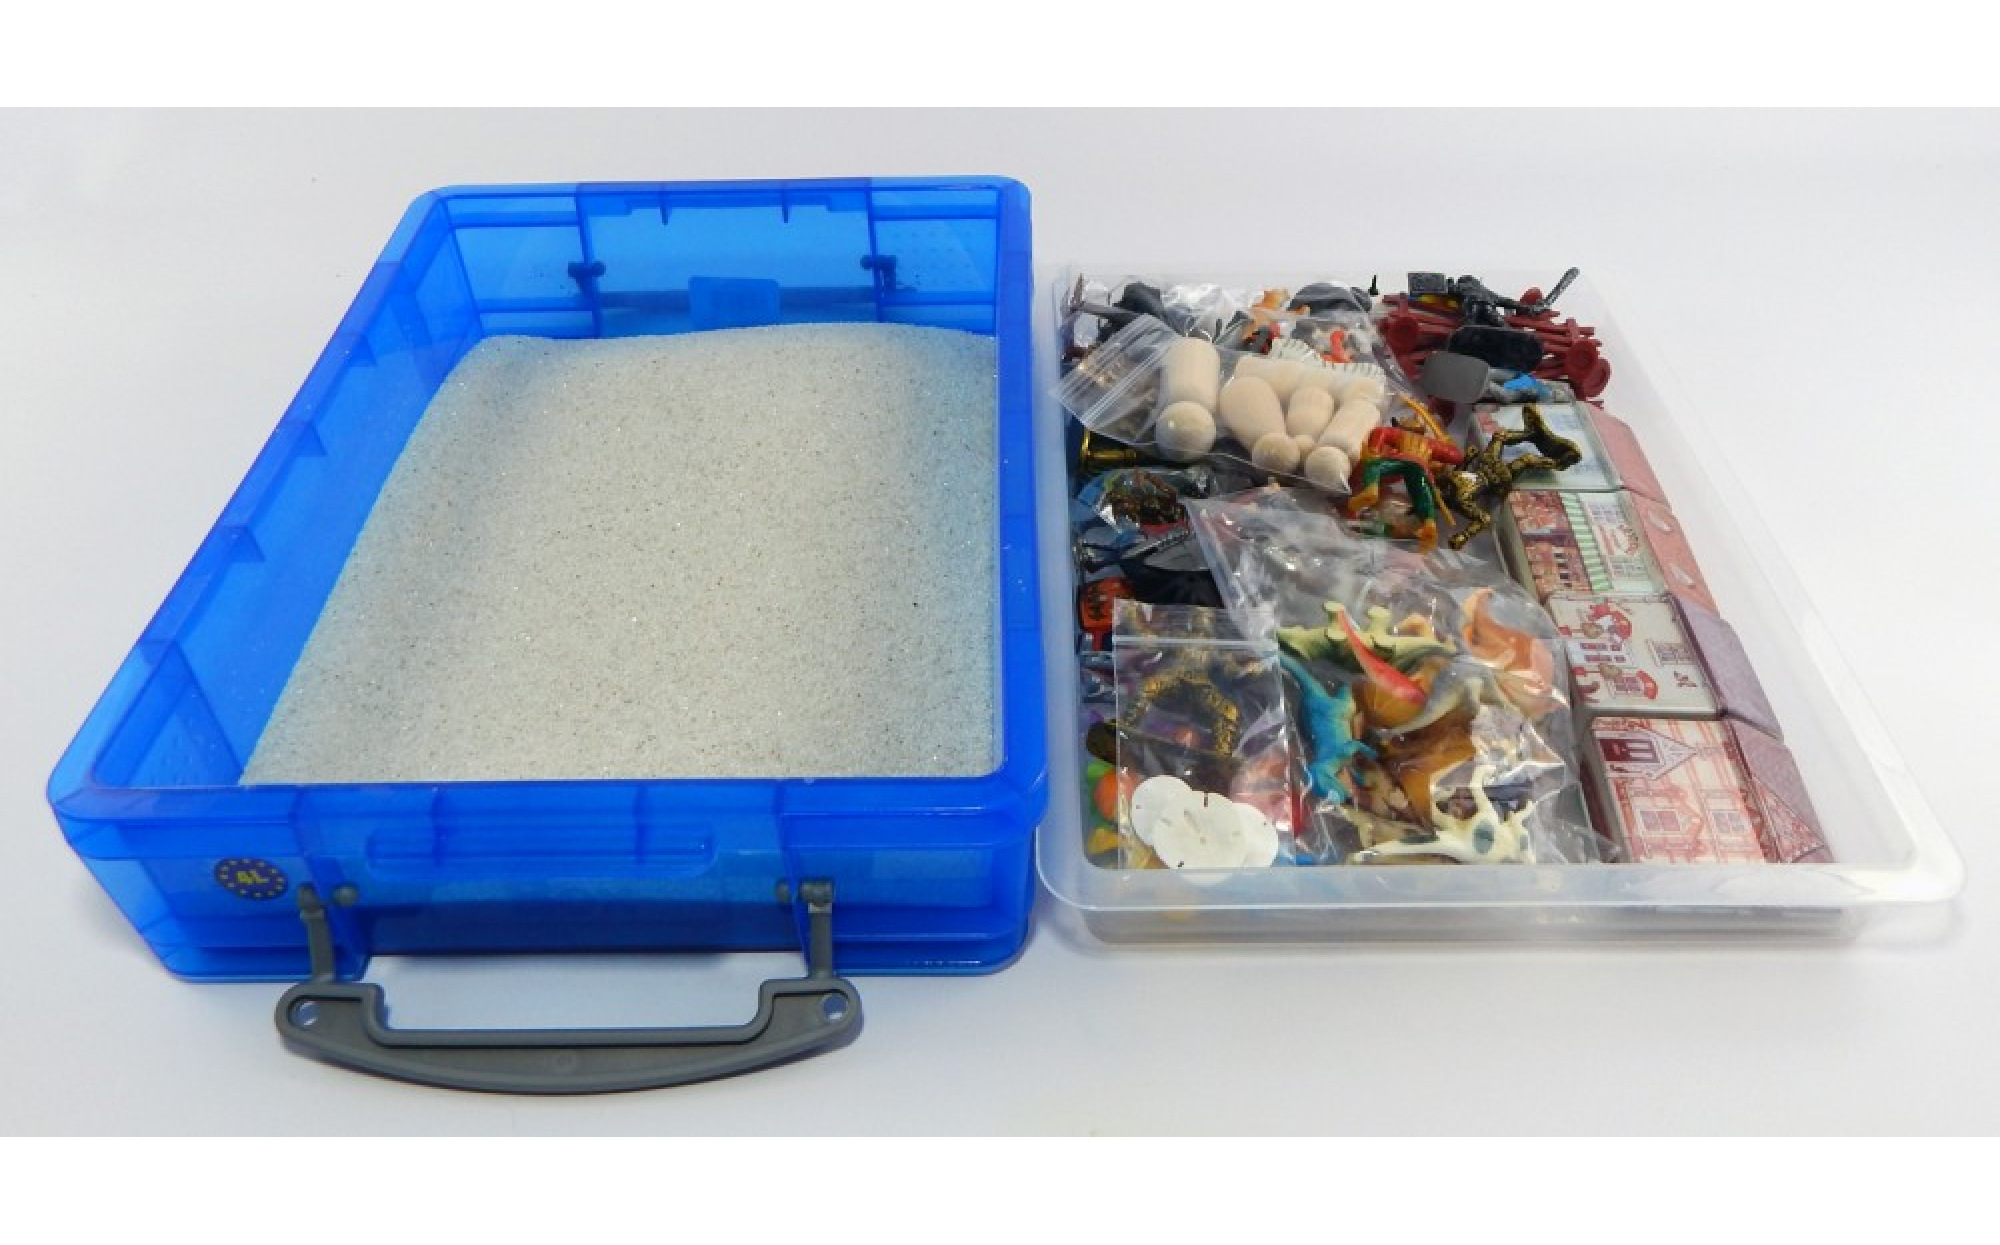 Basic Portable Sand Tray Starter Kit – Sand Tray Therapy